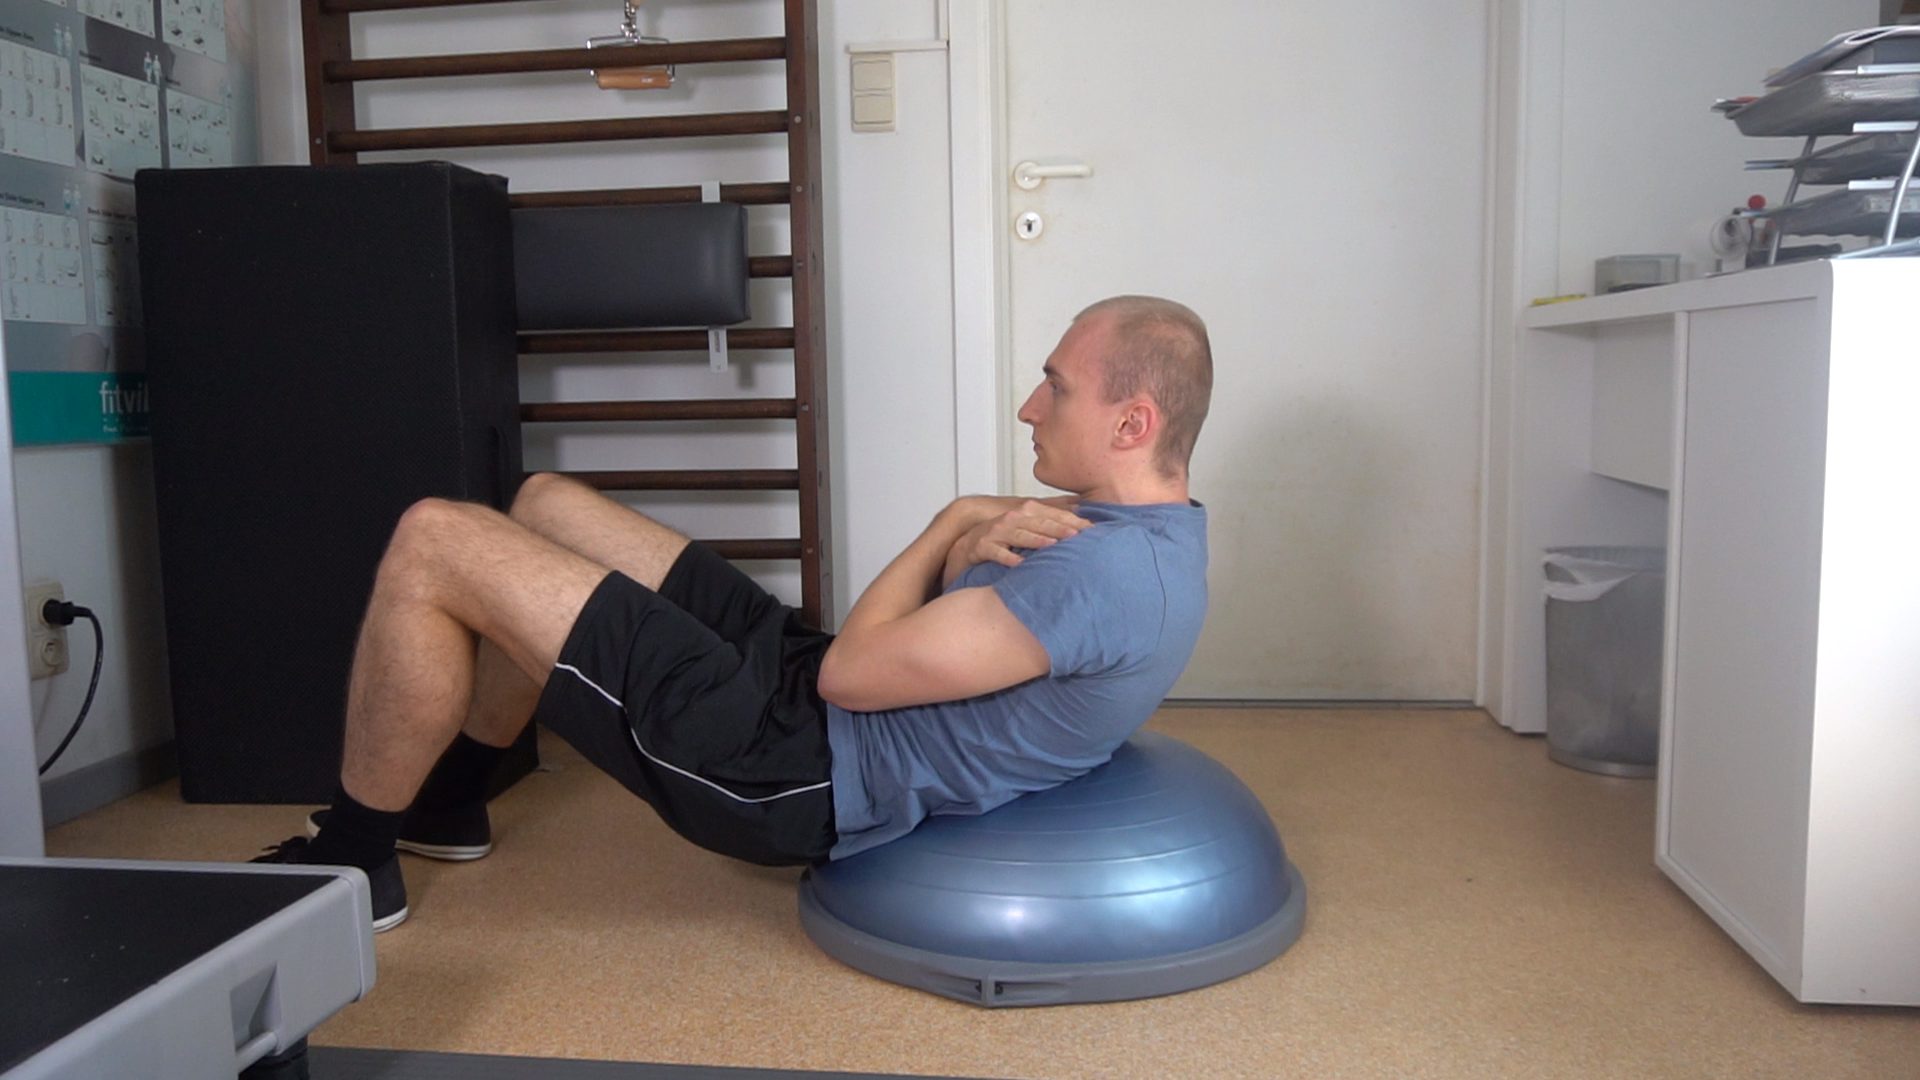 Bosu Ball Crunches: How To, Benefits,... - Weight Loss Made Practical